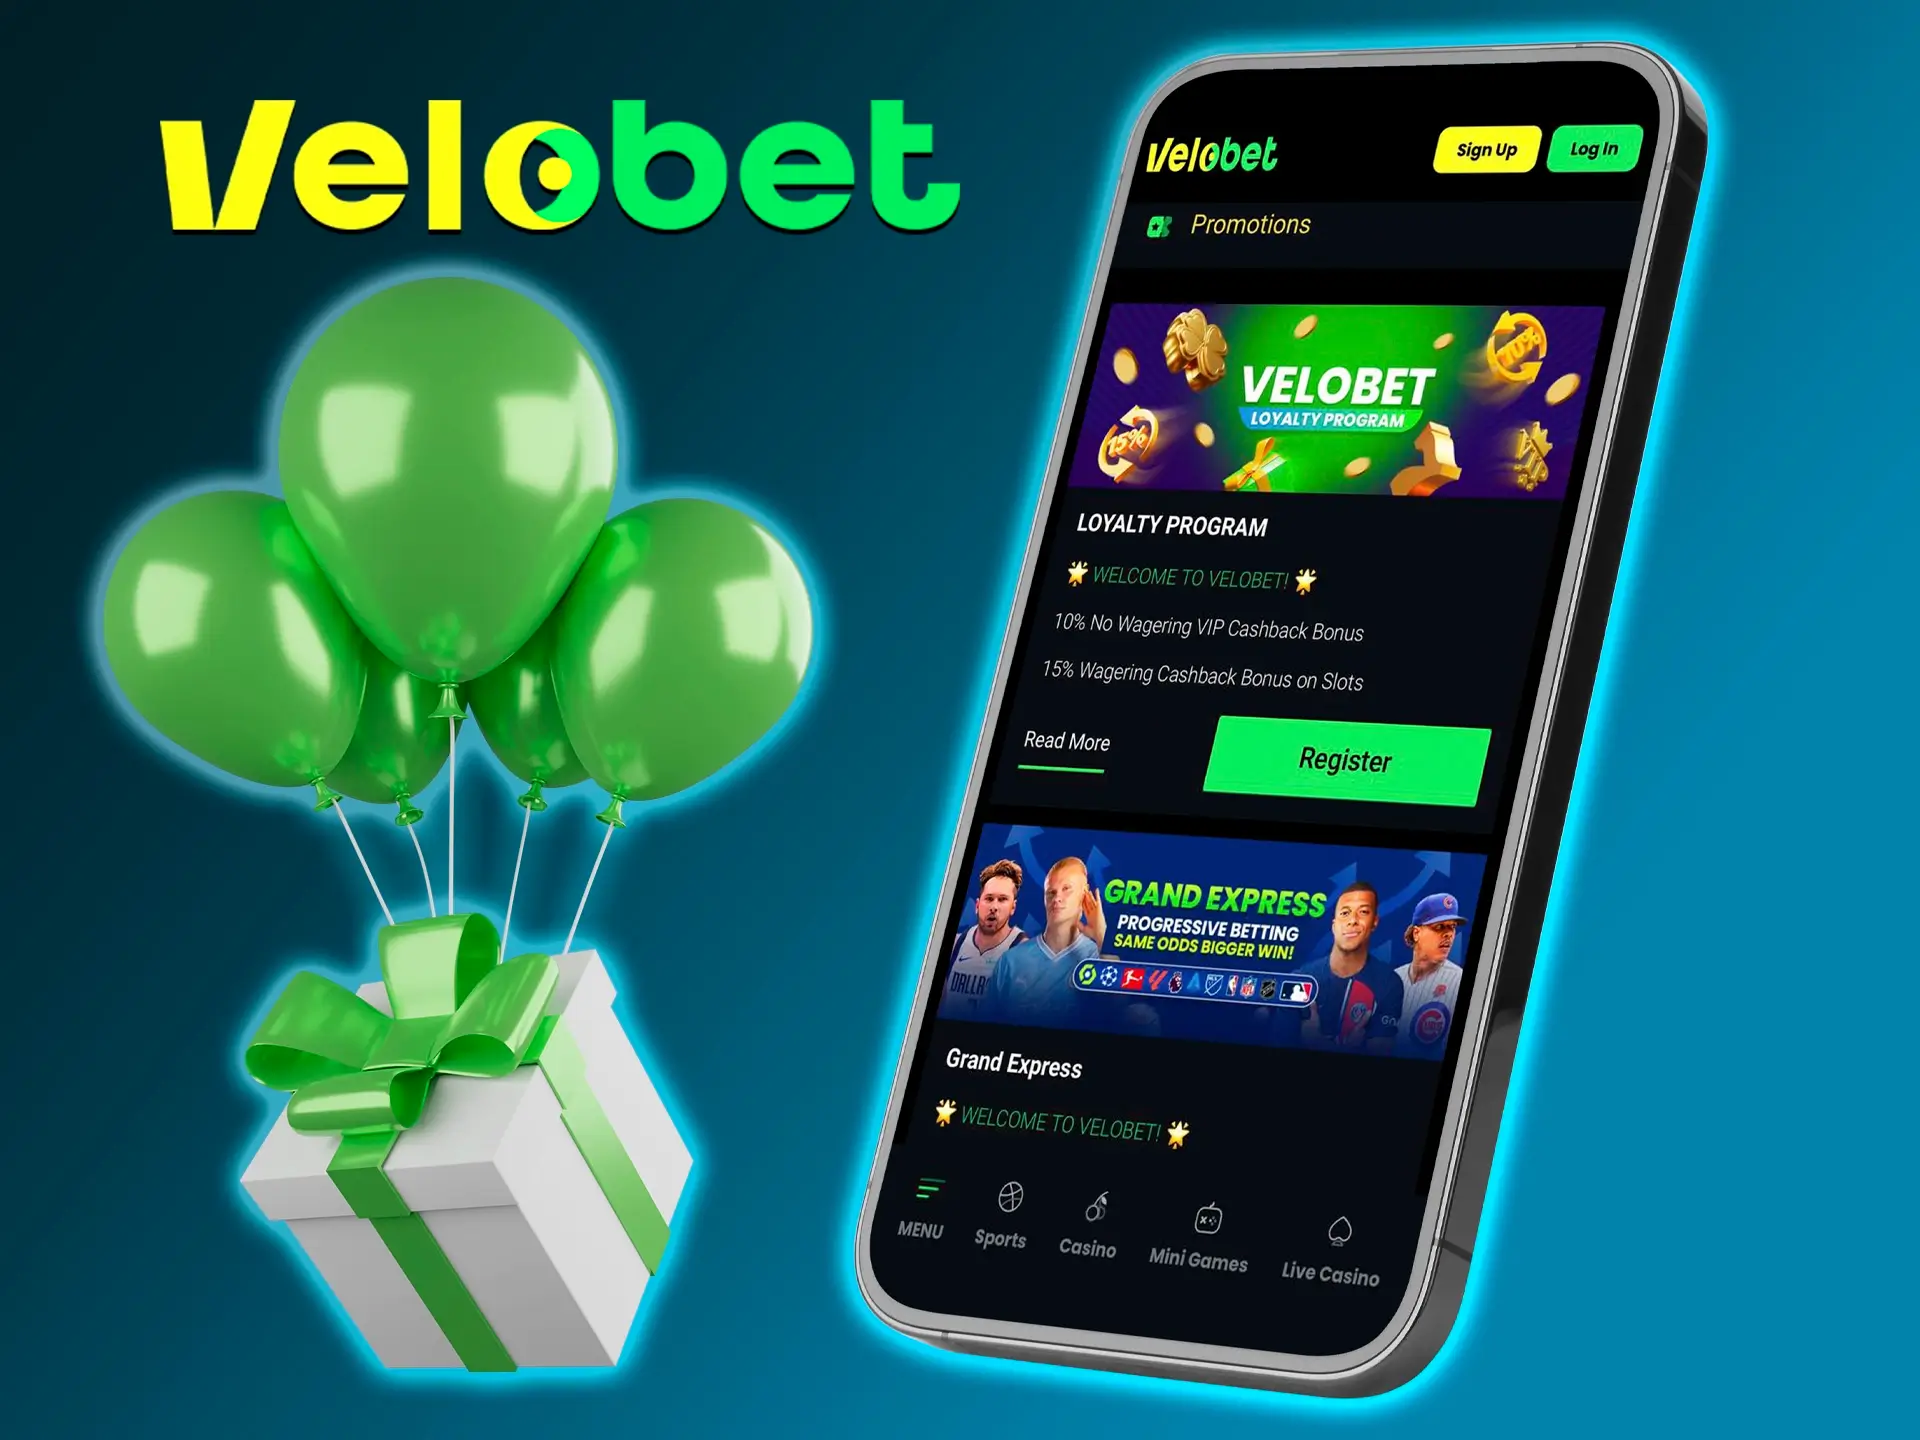 Take advantage of bonuses from Velobet Casino to play, bet and win regularly.